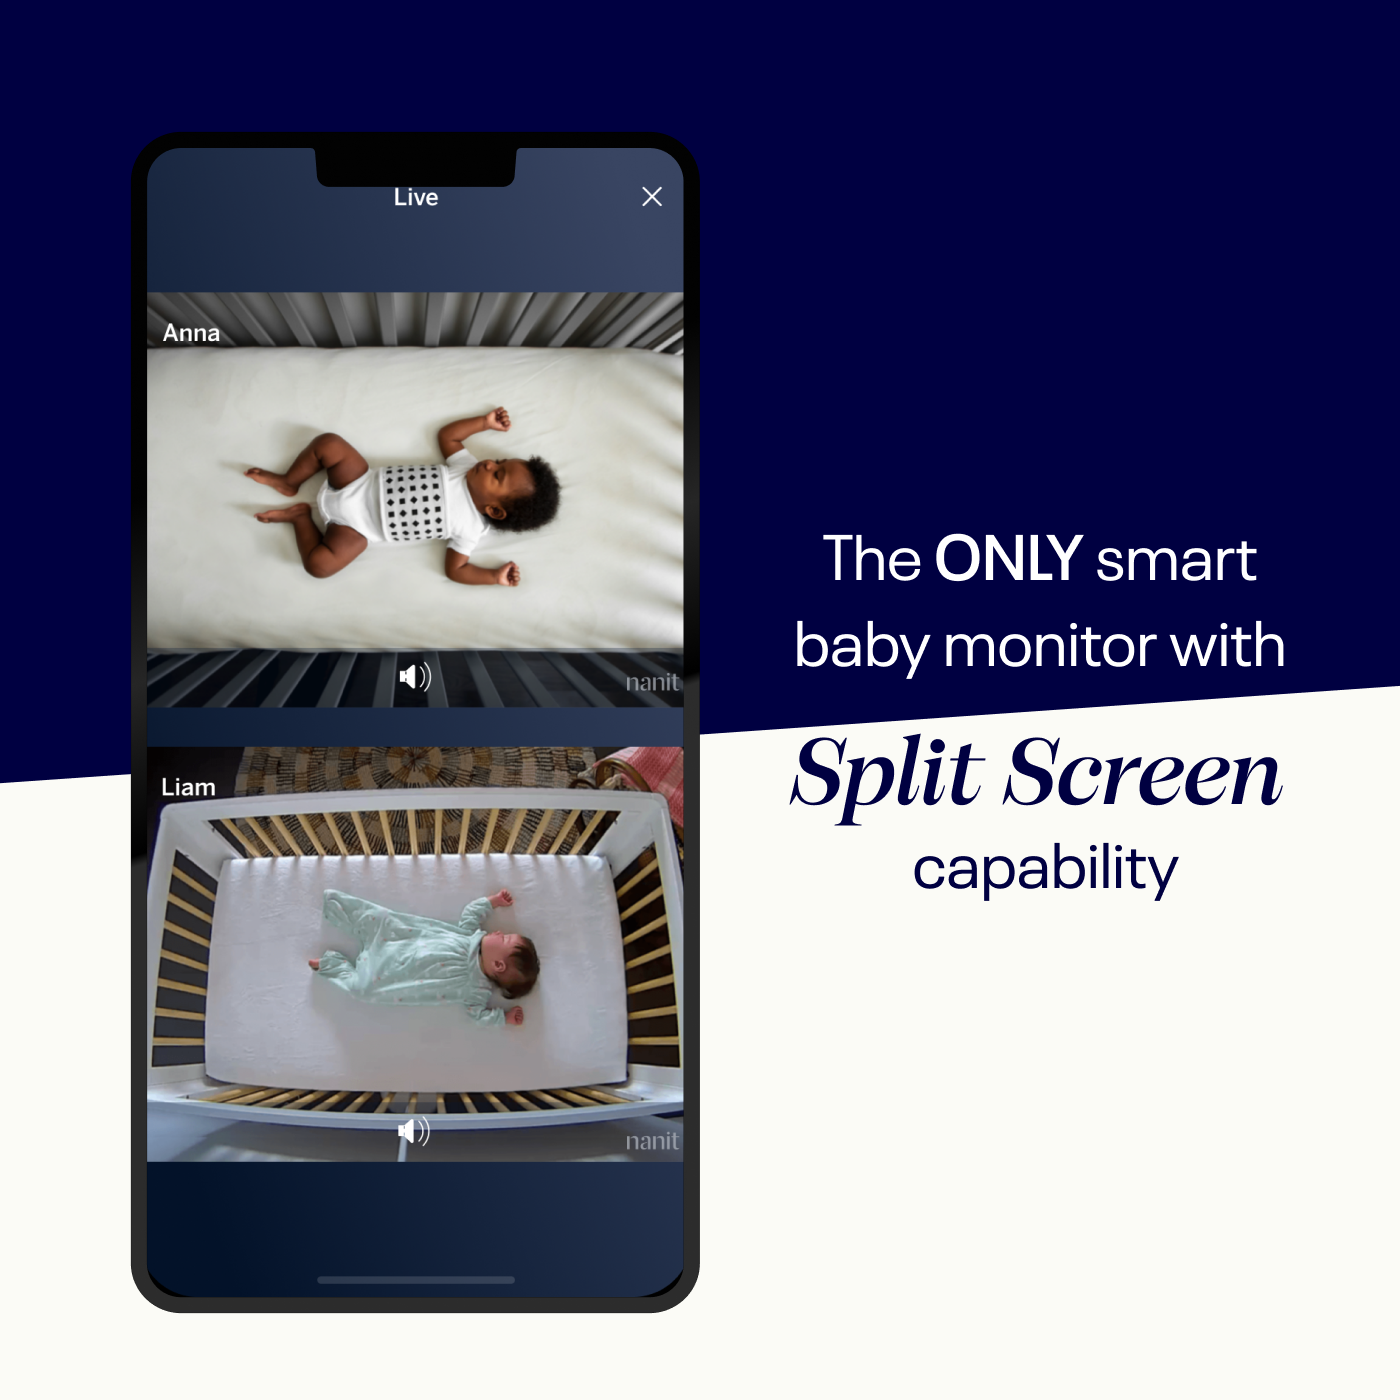 nanit app showing split screen - the only smart baby monitor with split screen capability